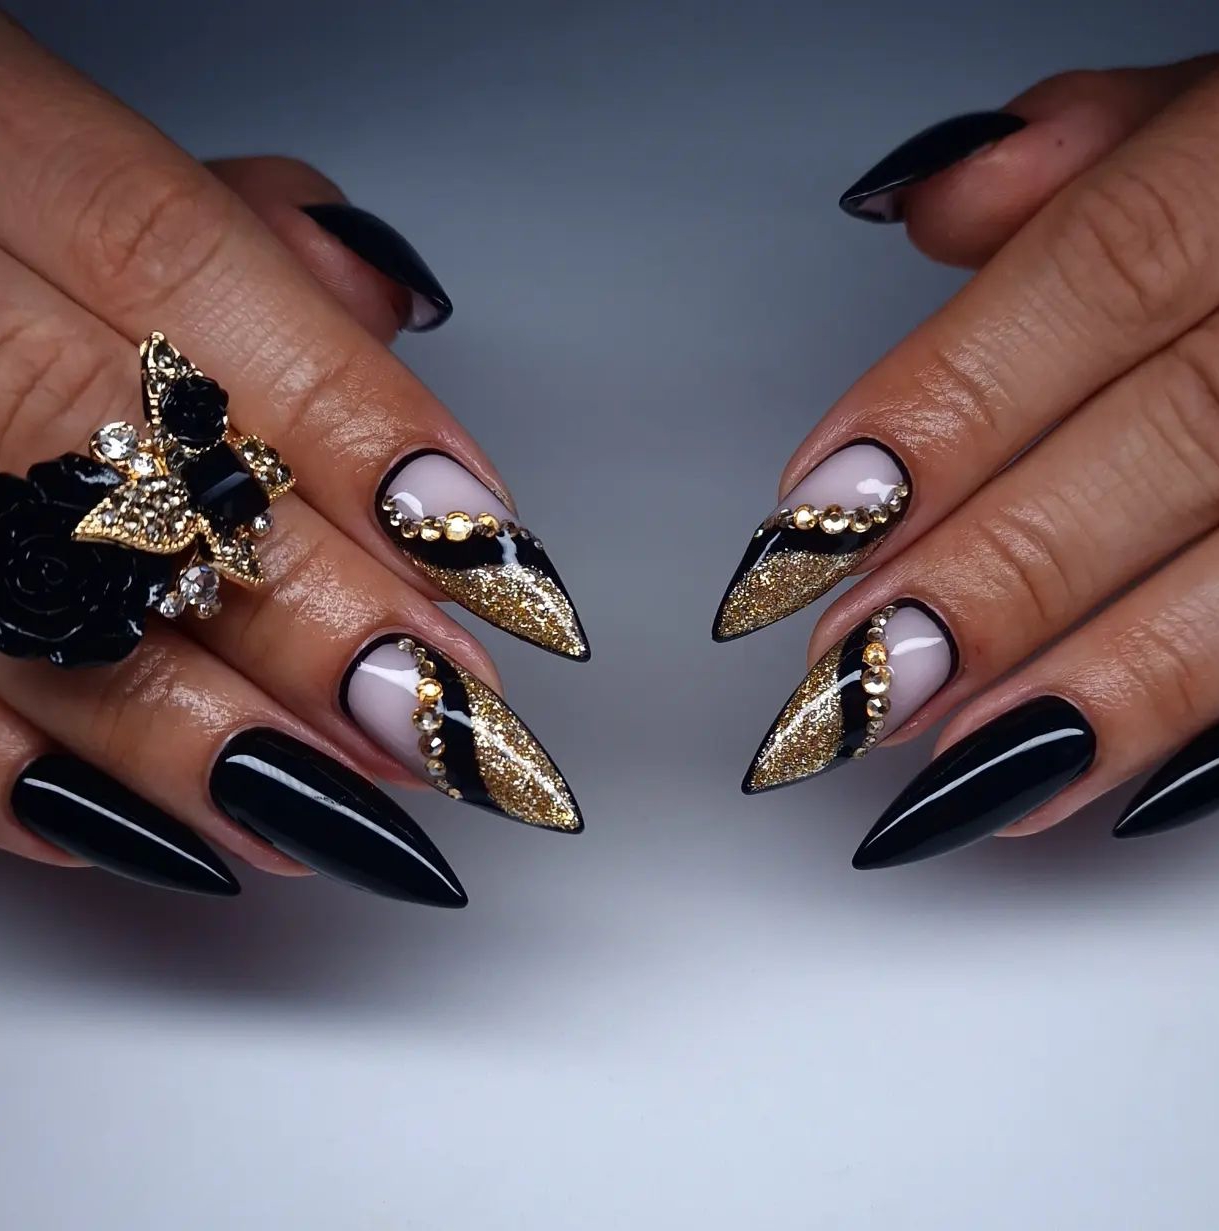 Pointy Black and Gold Nails with Rhinestones